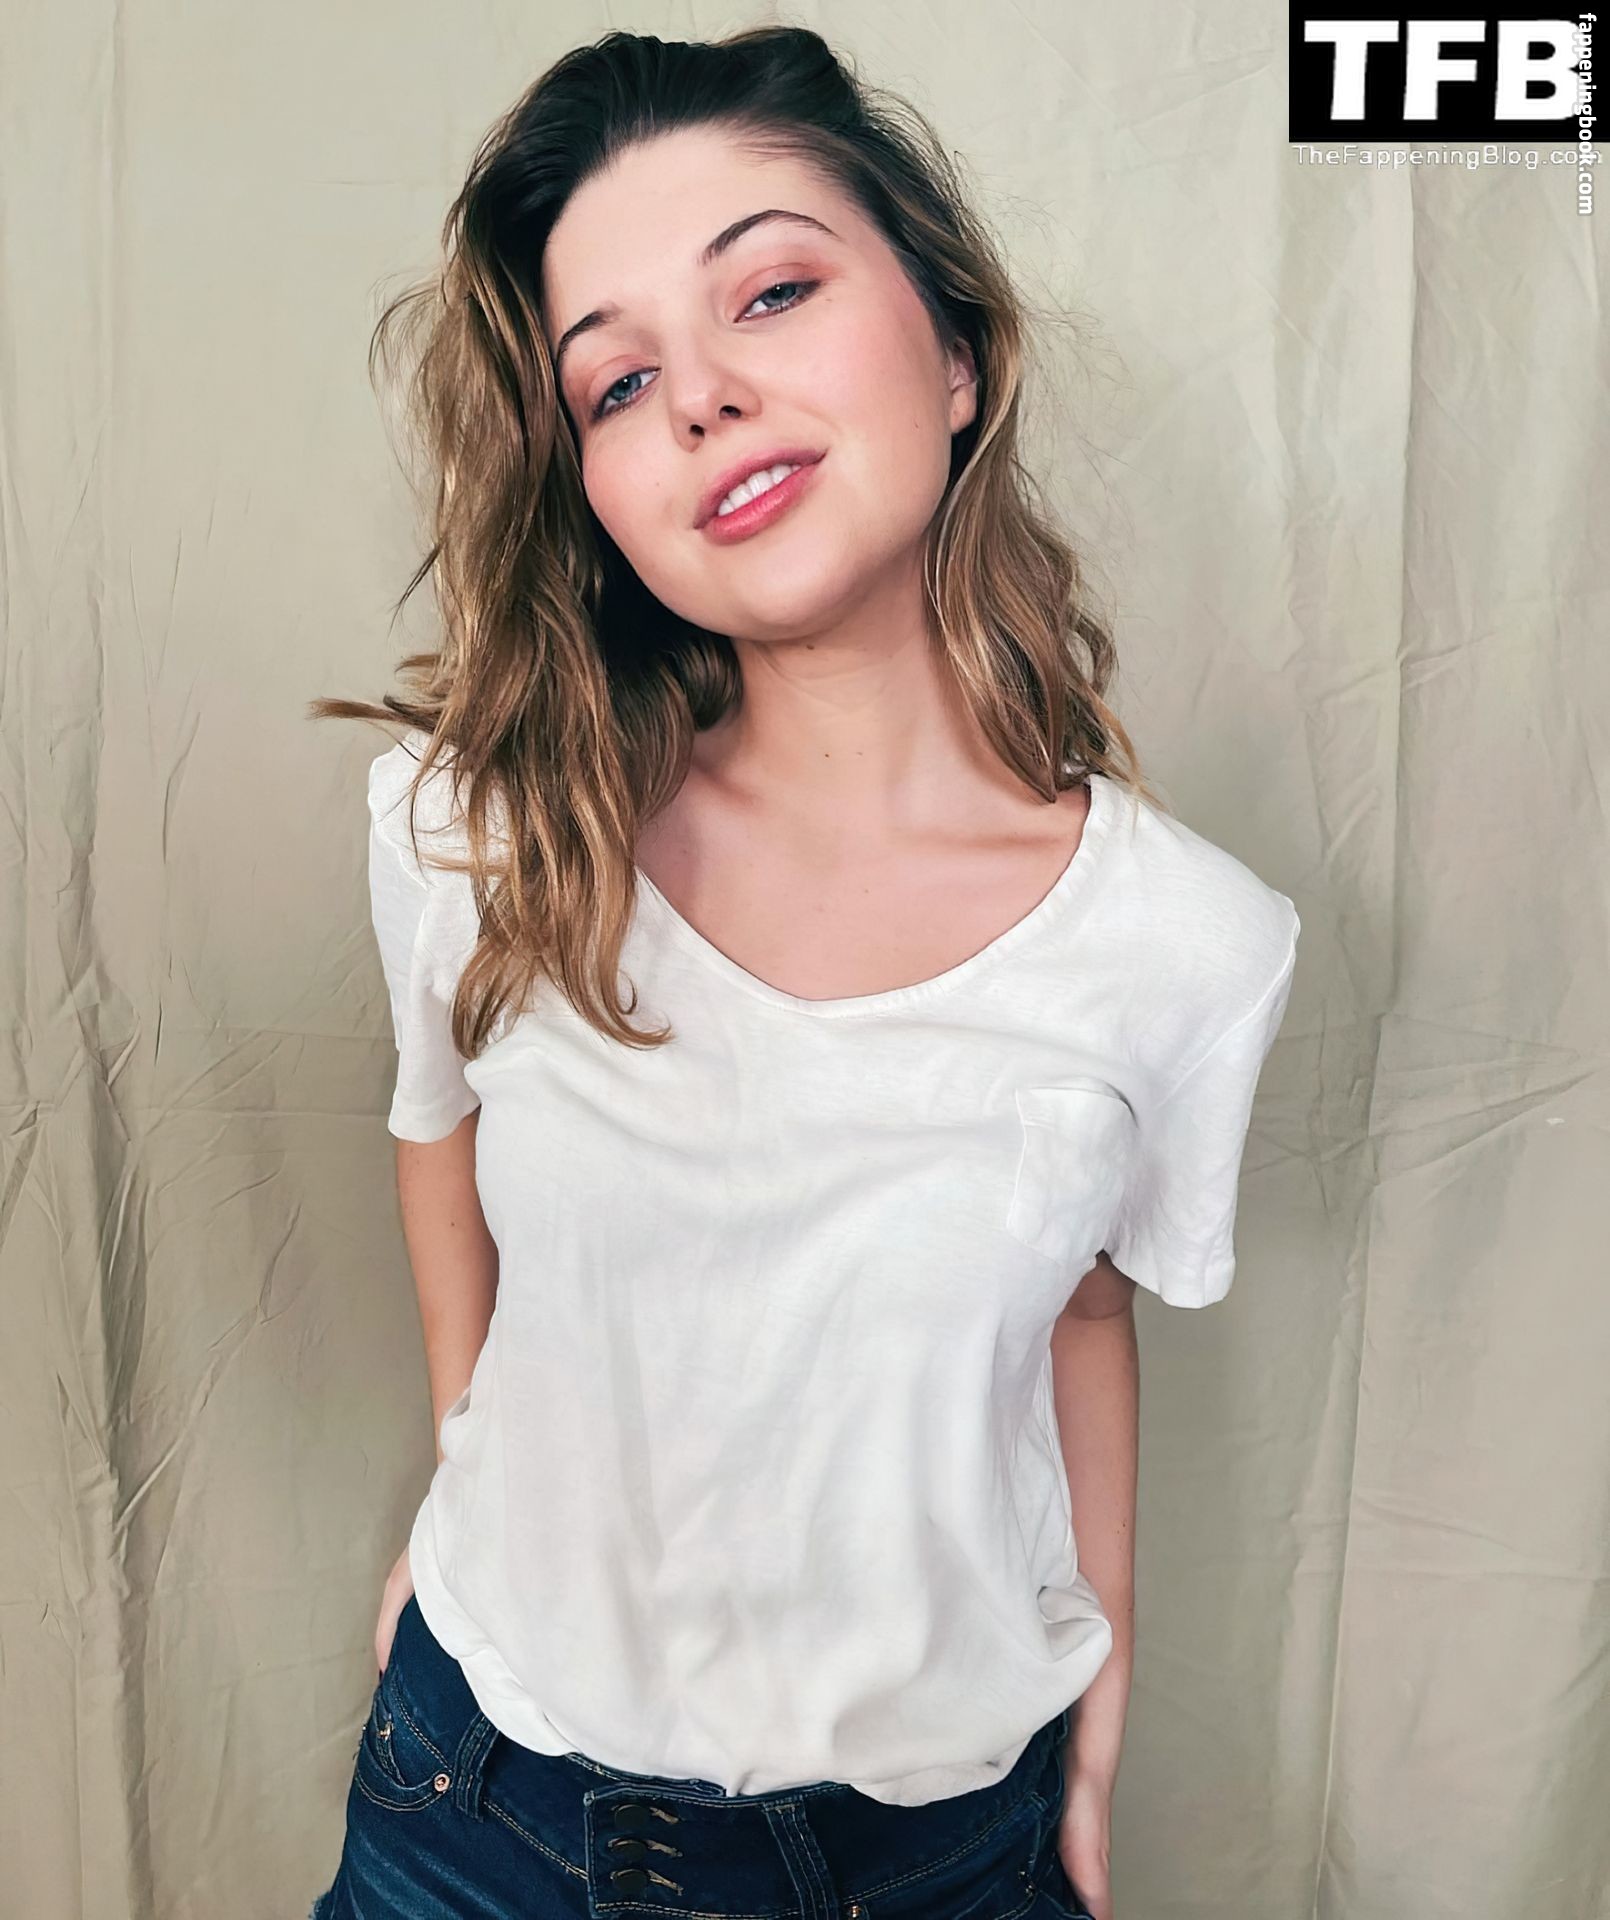 Sammi Hanratty Nude The Fappening Photo Fappeningbook